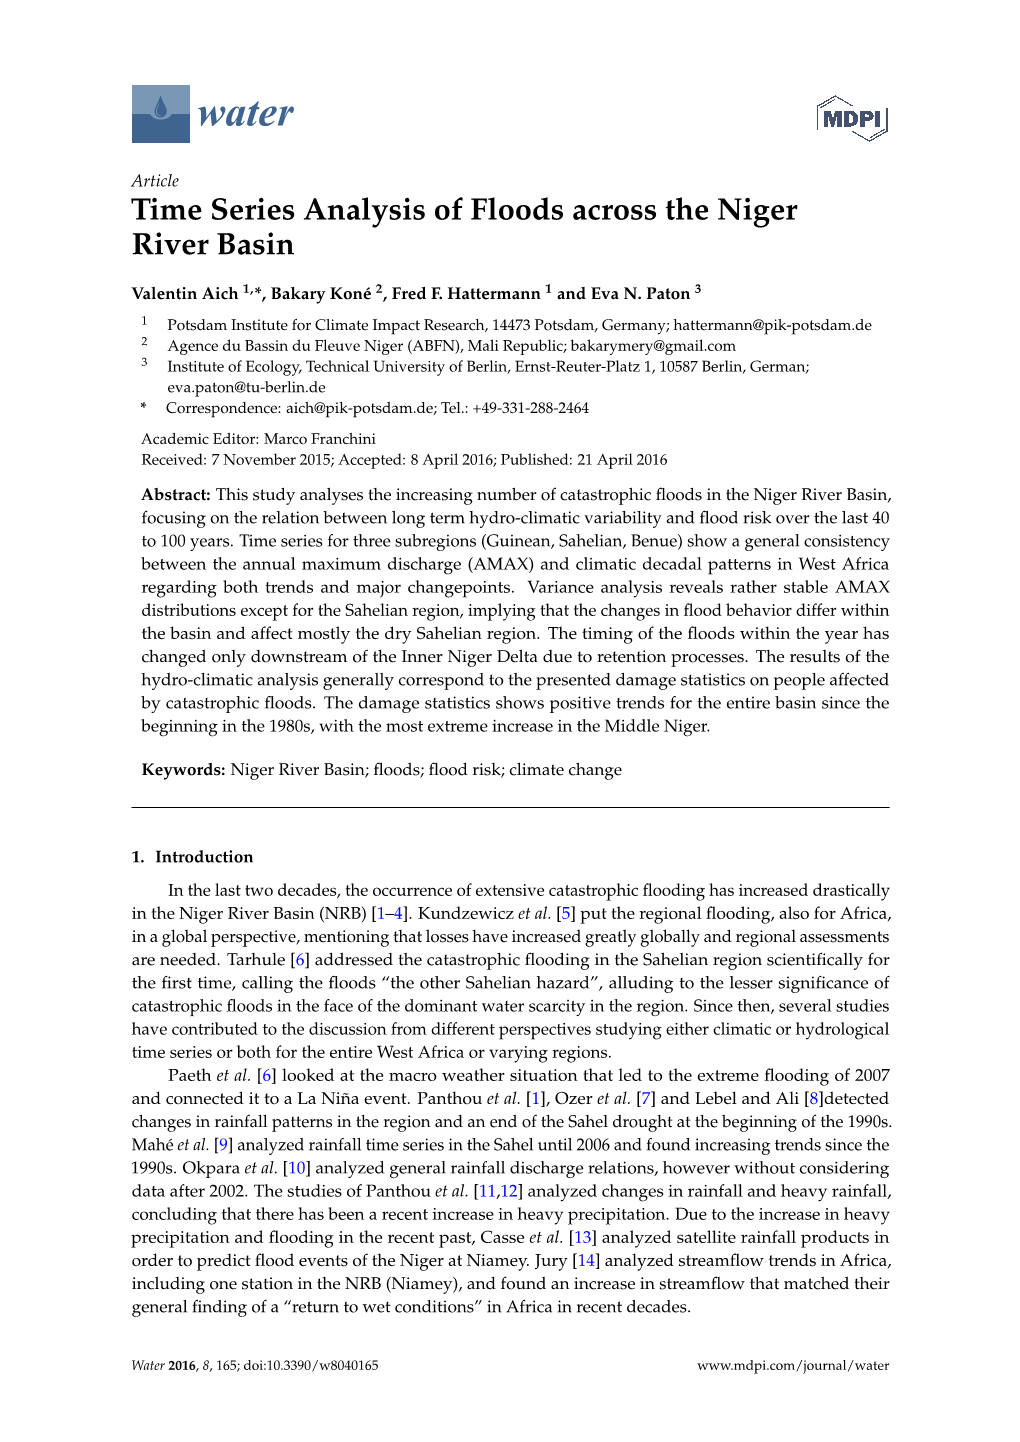 Time Series Analysis of Floods Across the Niger River Basin